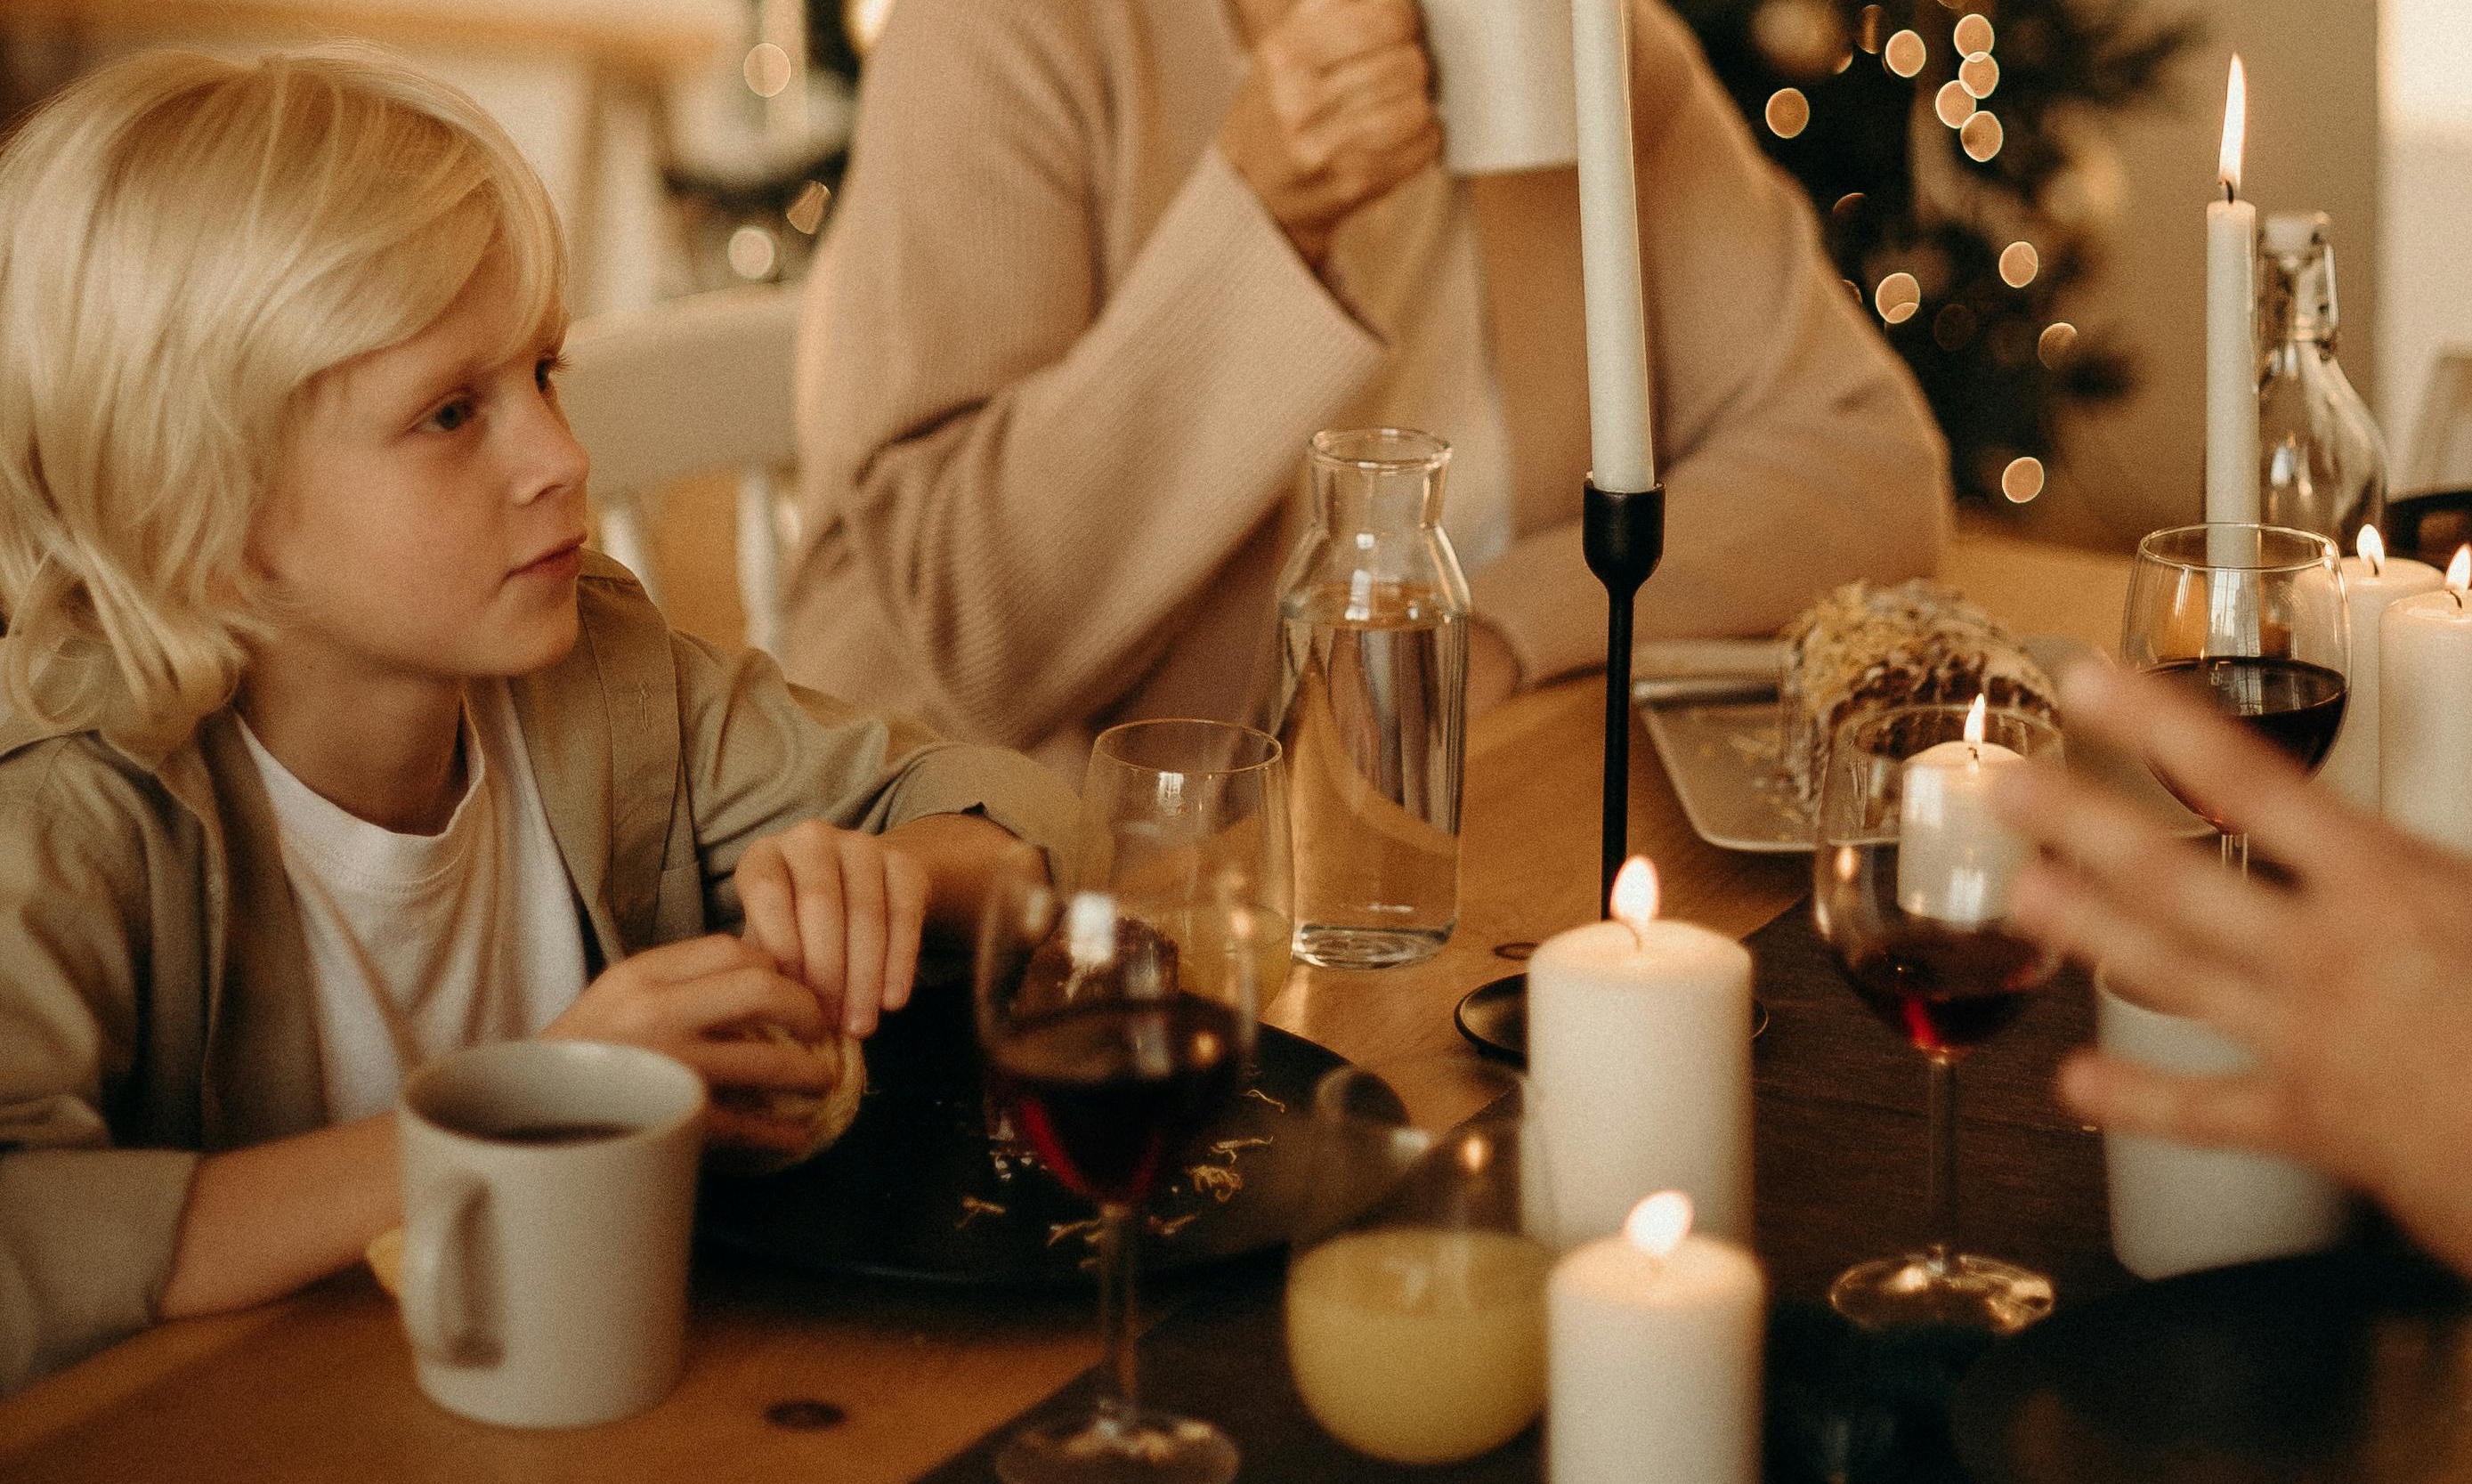 A boy at a family dinner table | Source: Pexels